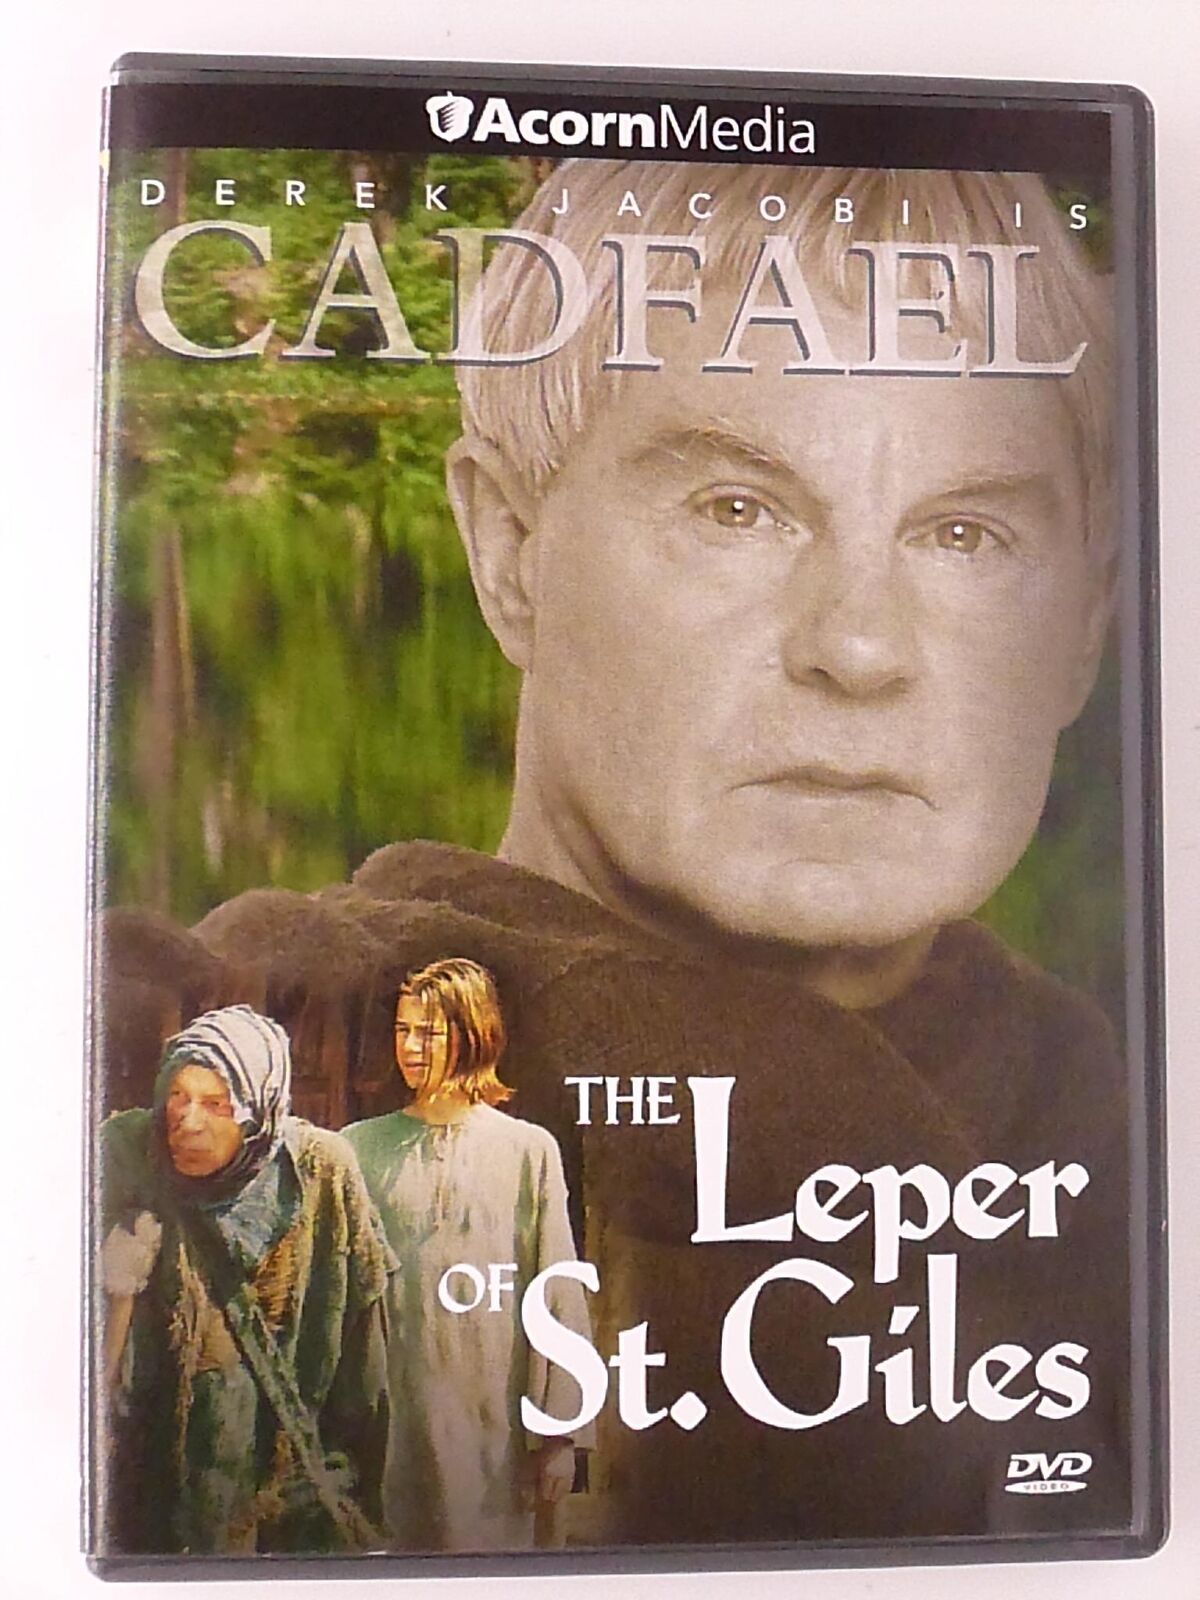 Cadfael - The Leper of St. Giles (DVD, 1994) - I0227